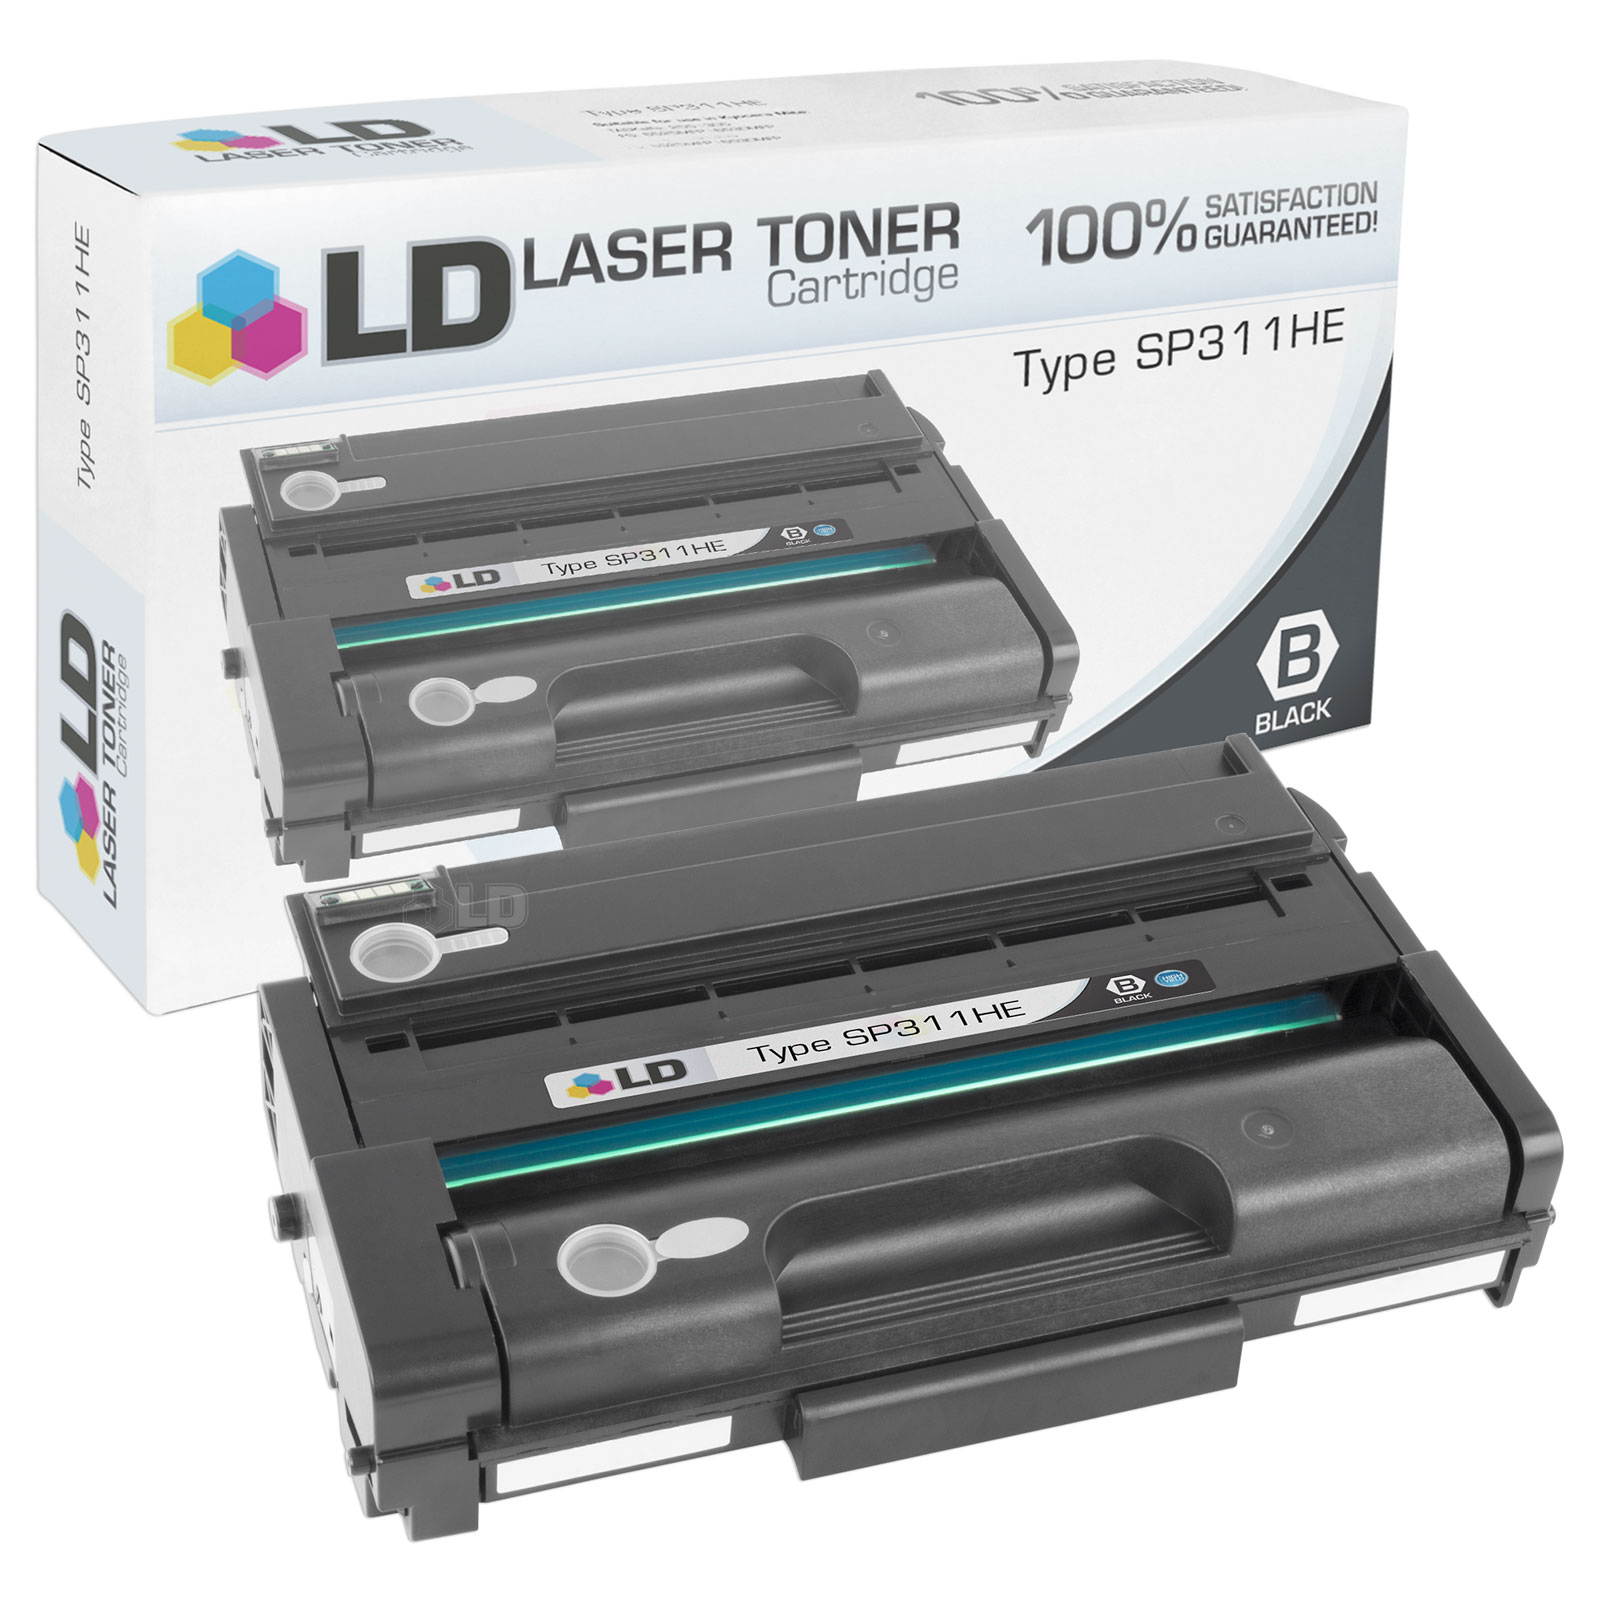 Compatible Ricoh 407245 High Yield Black Toner Cartridge (3,500 Page Yield) - image 2 of 2